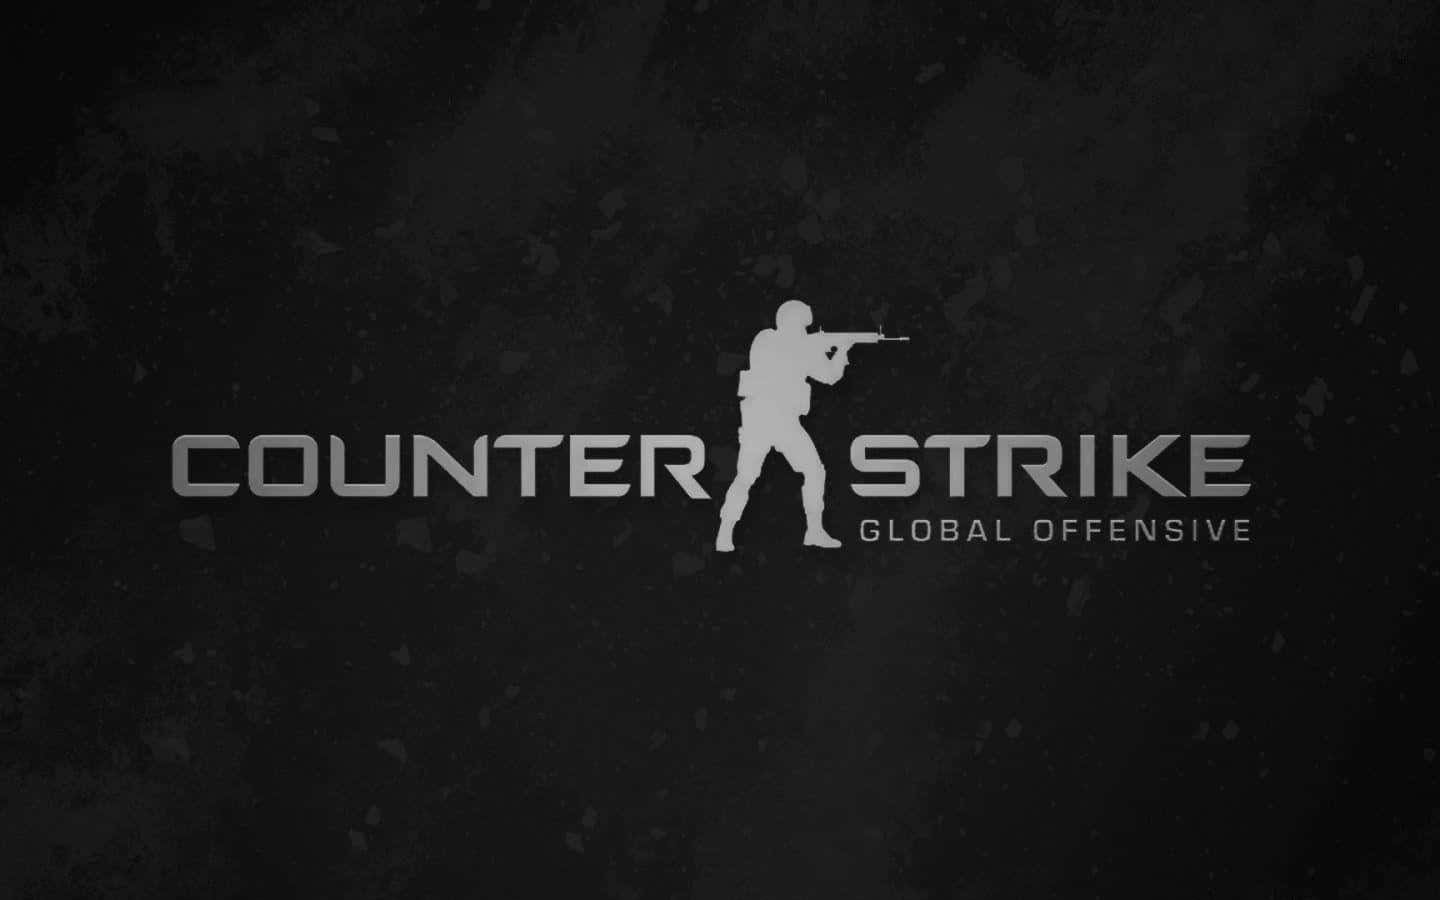 Jump into the world of Counter-Strike Wallpaper